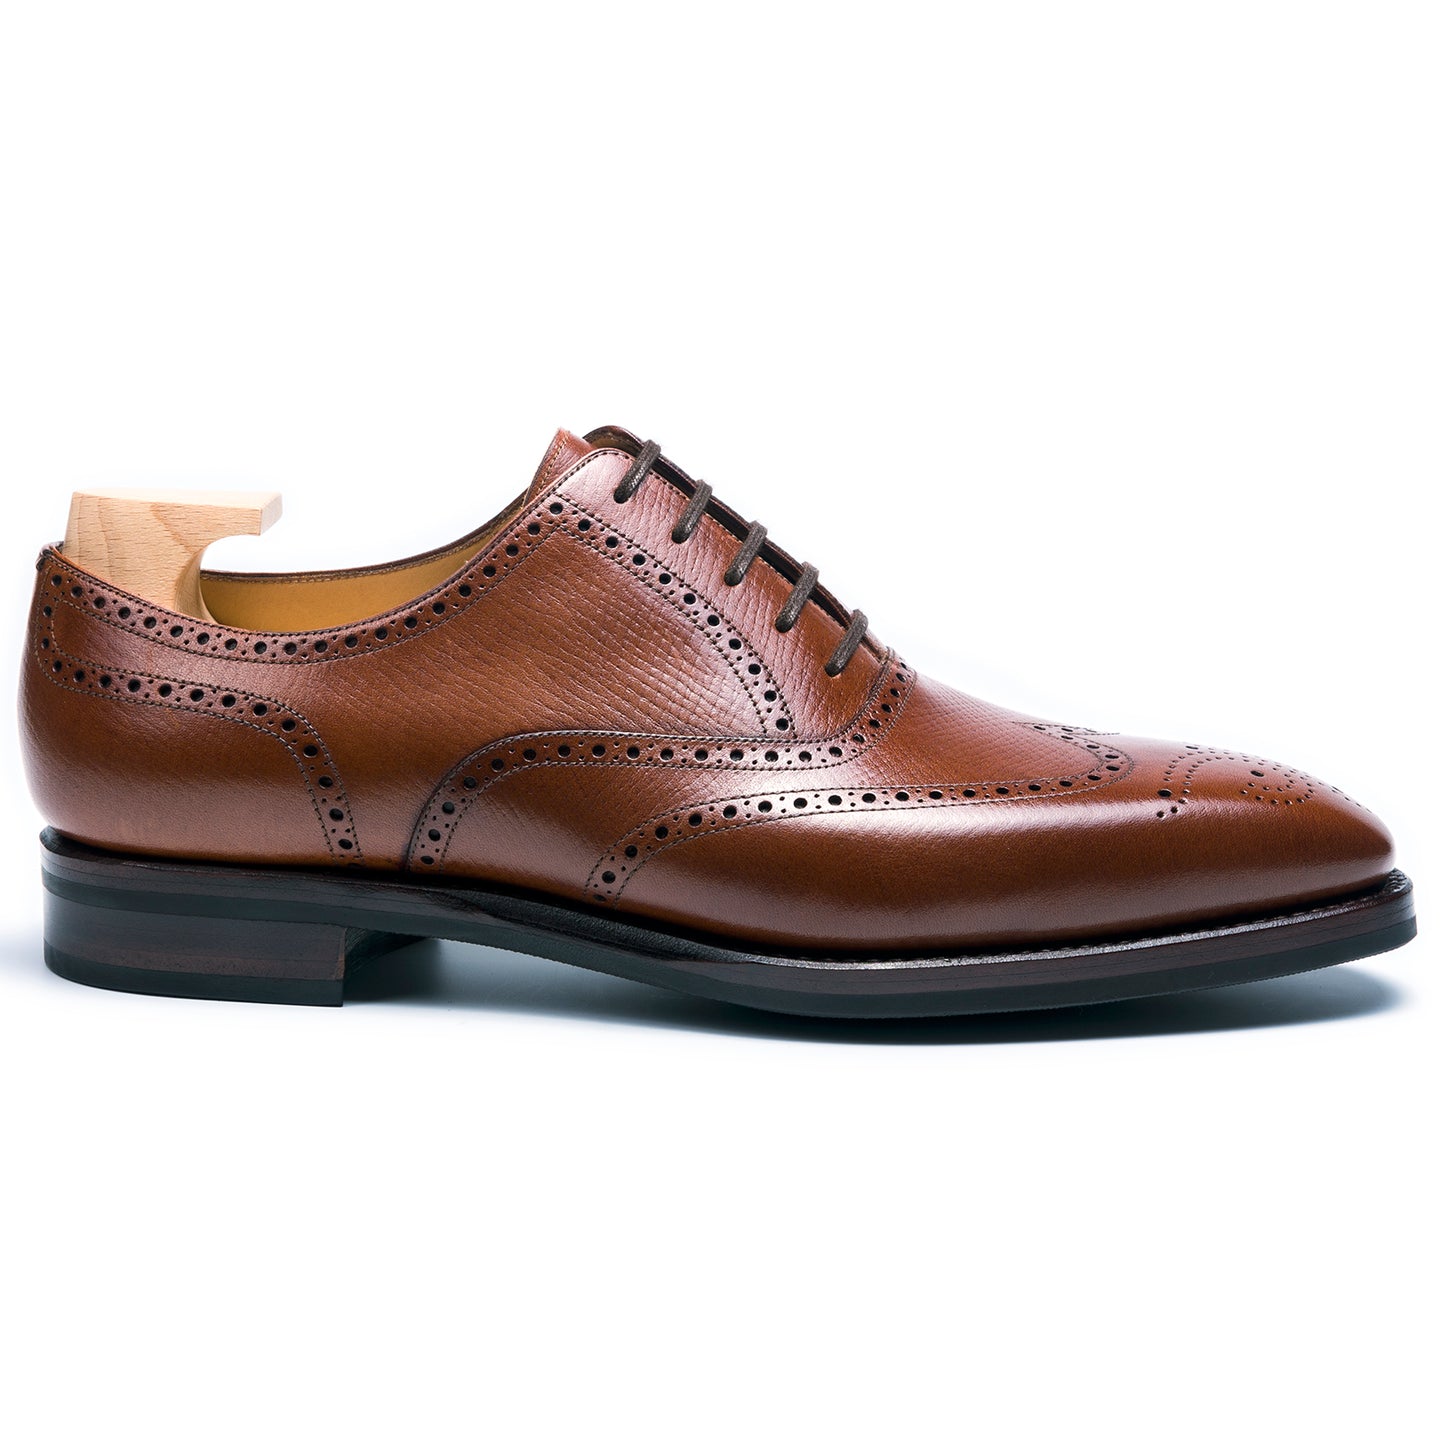 TLB Mallorca leather shoes 110 / PICASSO / HATCH GRAIN TAN